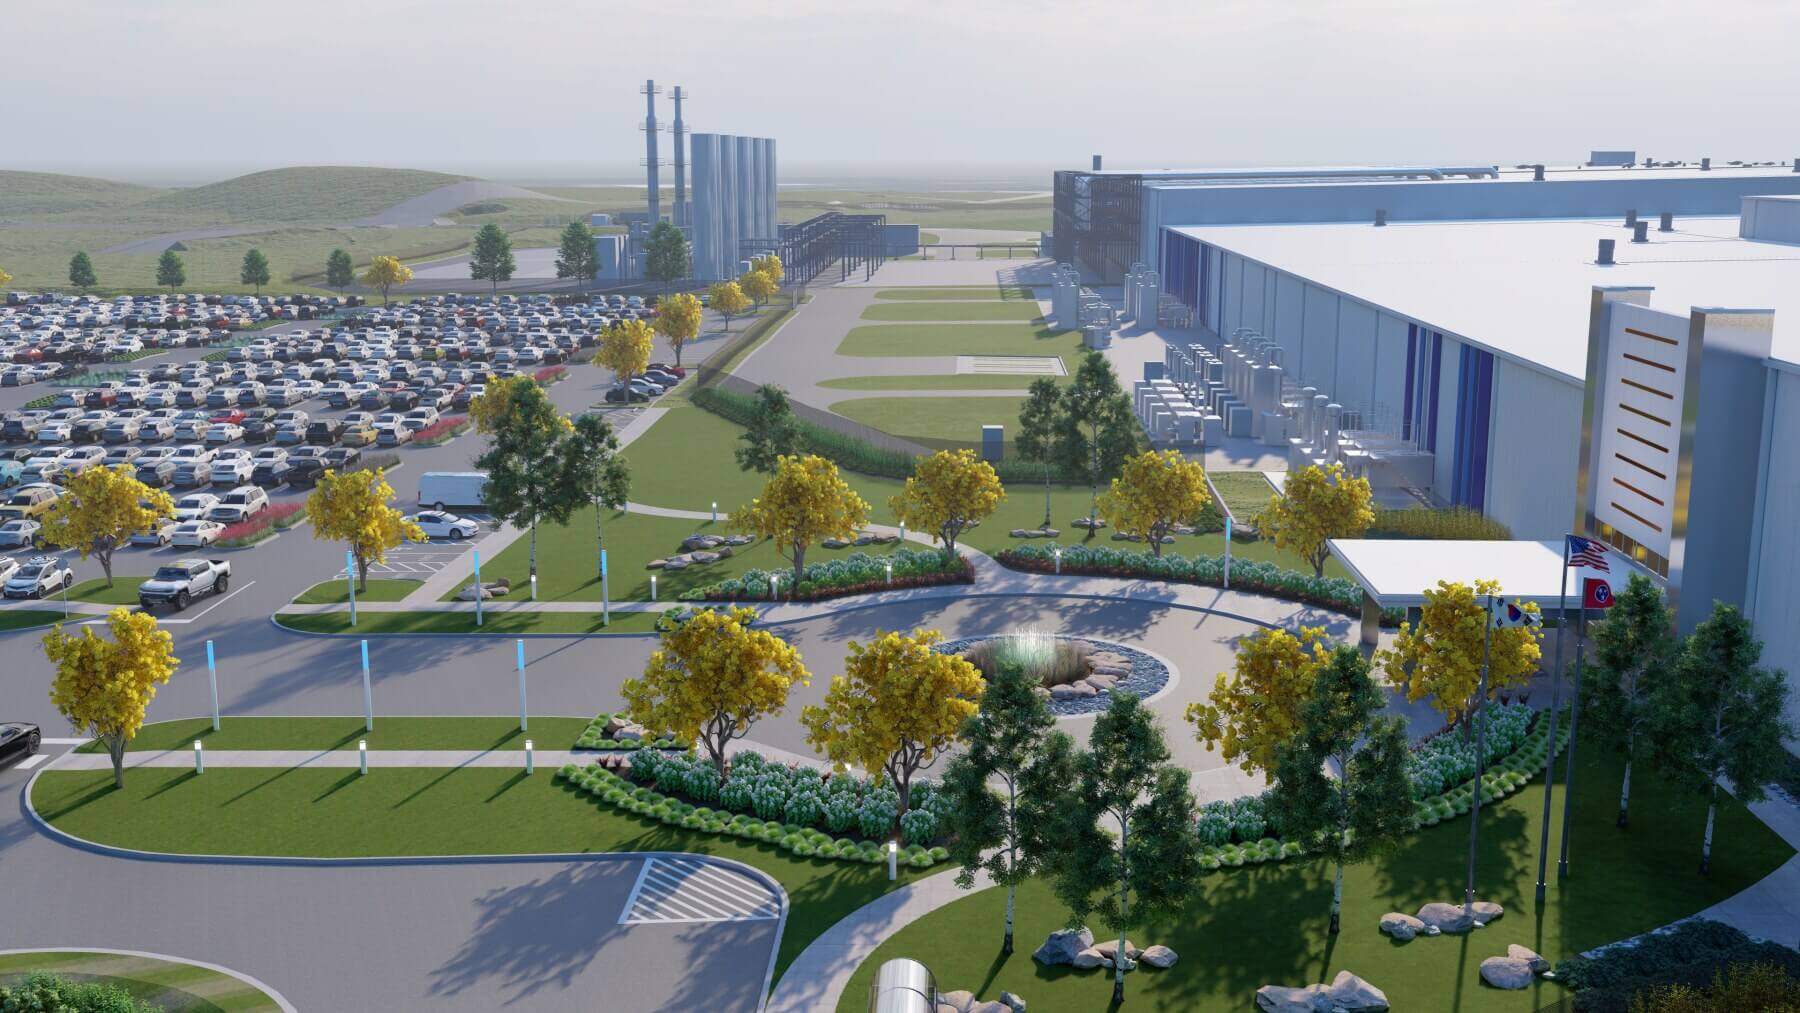 a rendering of the entrance for the Ultium Spring Hill battery plant